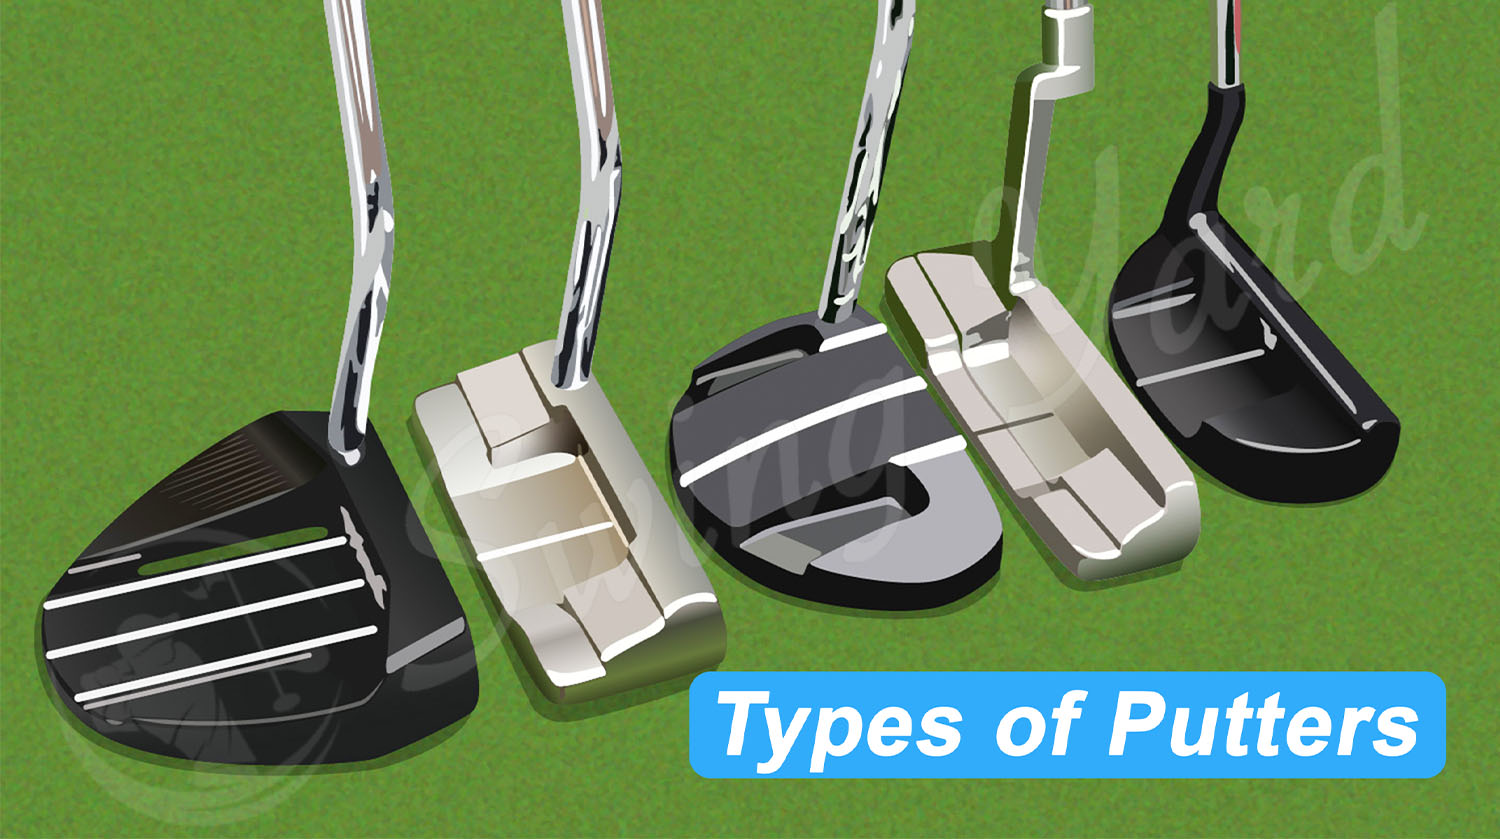 Types of putters